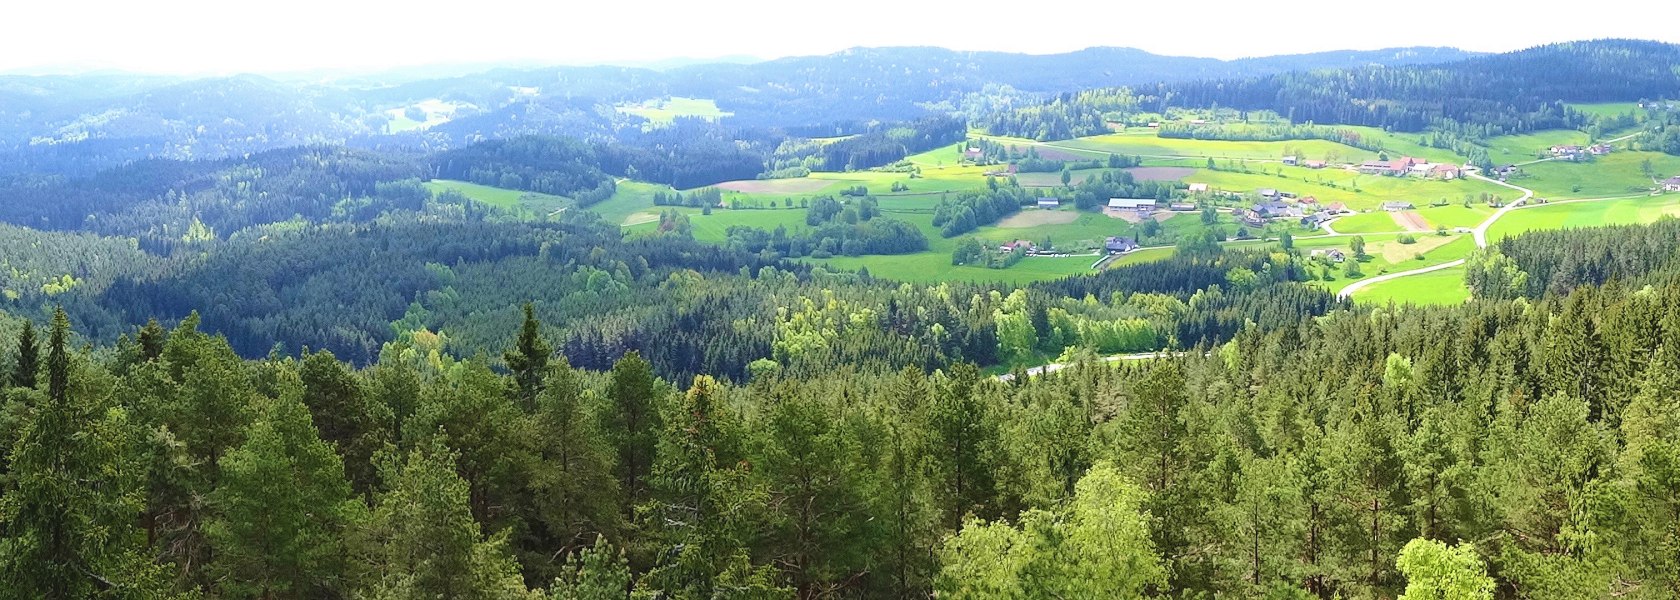 View from the lookout tower on Schwarzenberg hill, © Verein Naturpark Nordwald